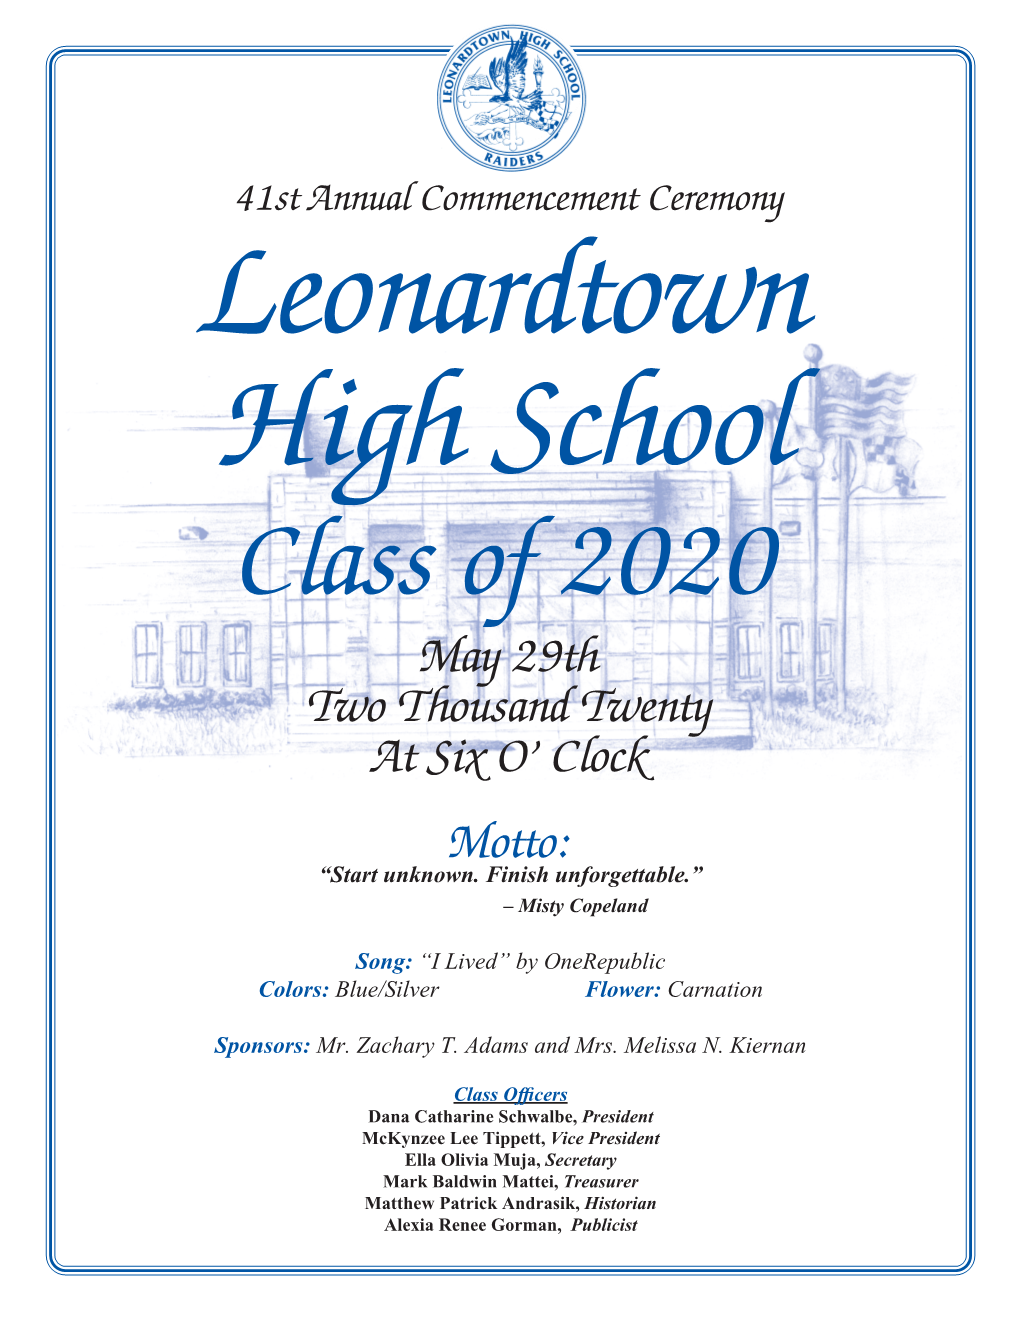 Class of 2020 May 29Th Two Thousand Twenty at Six O’ Clock Motto: “Start Unknown